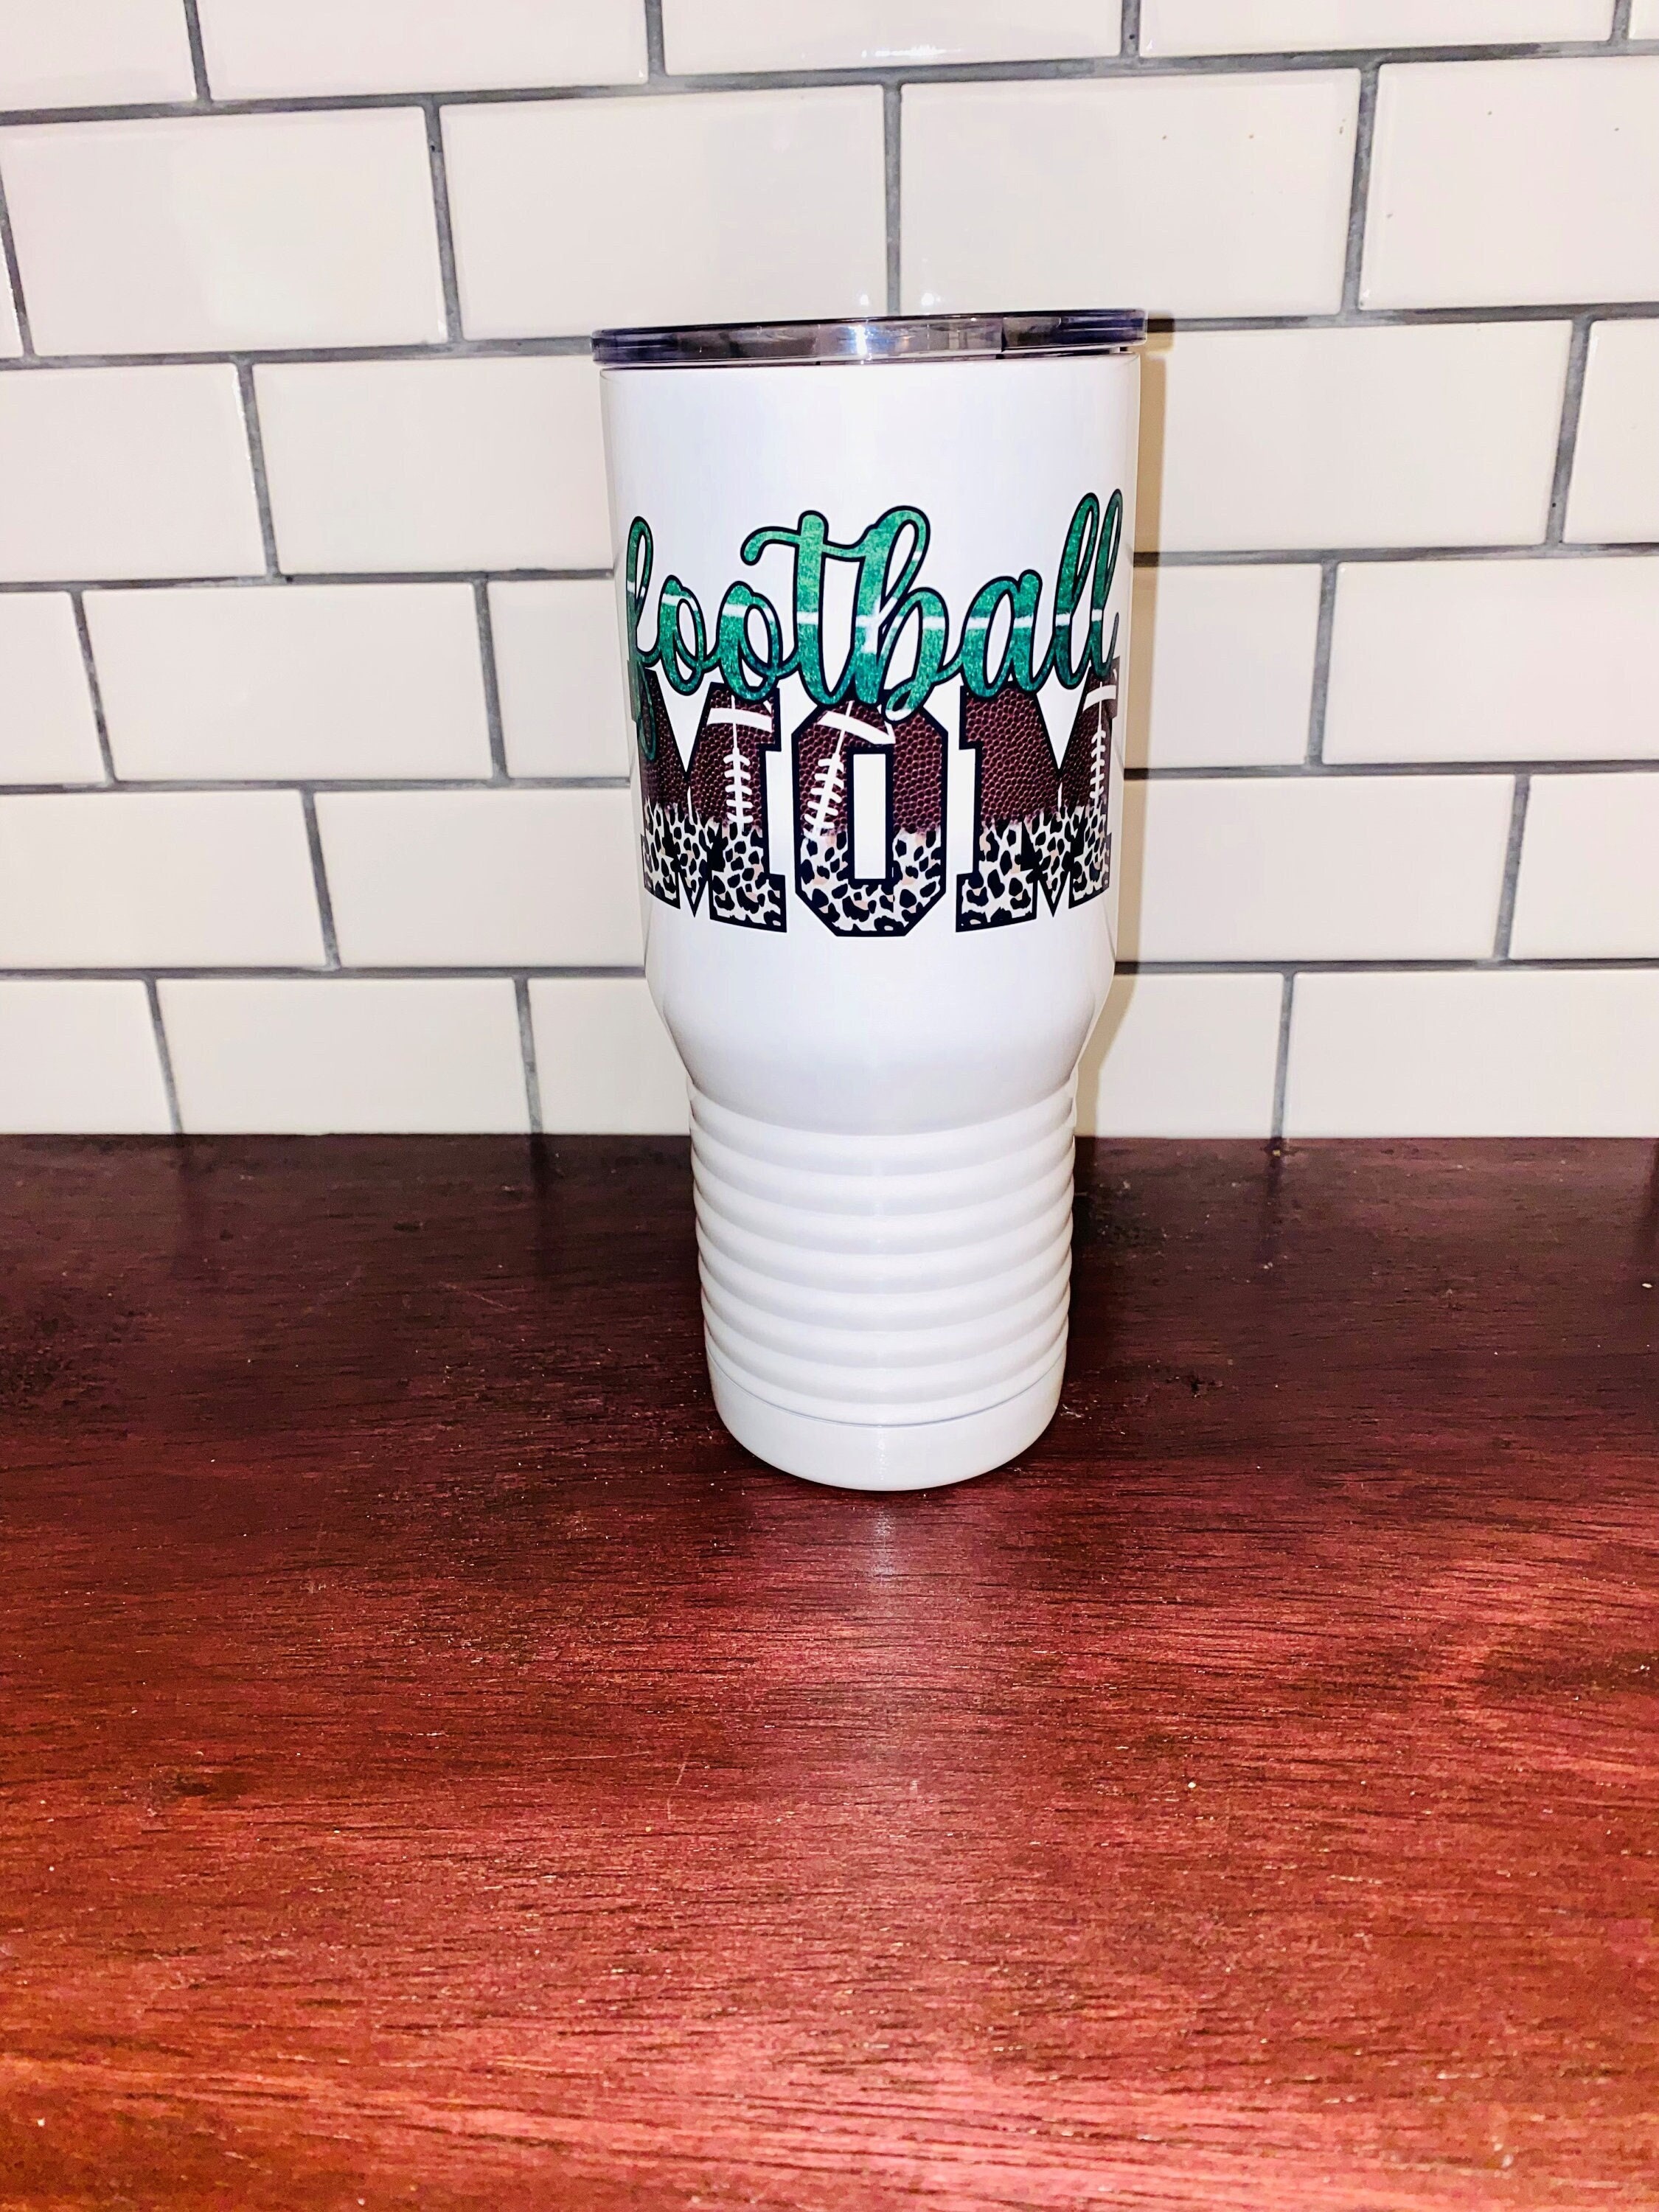 Sassycups Best Mom Ever Tumbler | Engraved Stainless Steel Tumbler with Straw | New Mom Travel Mug | Worlds Best Mom Tumbler | New Mom Cup | Mom to Be